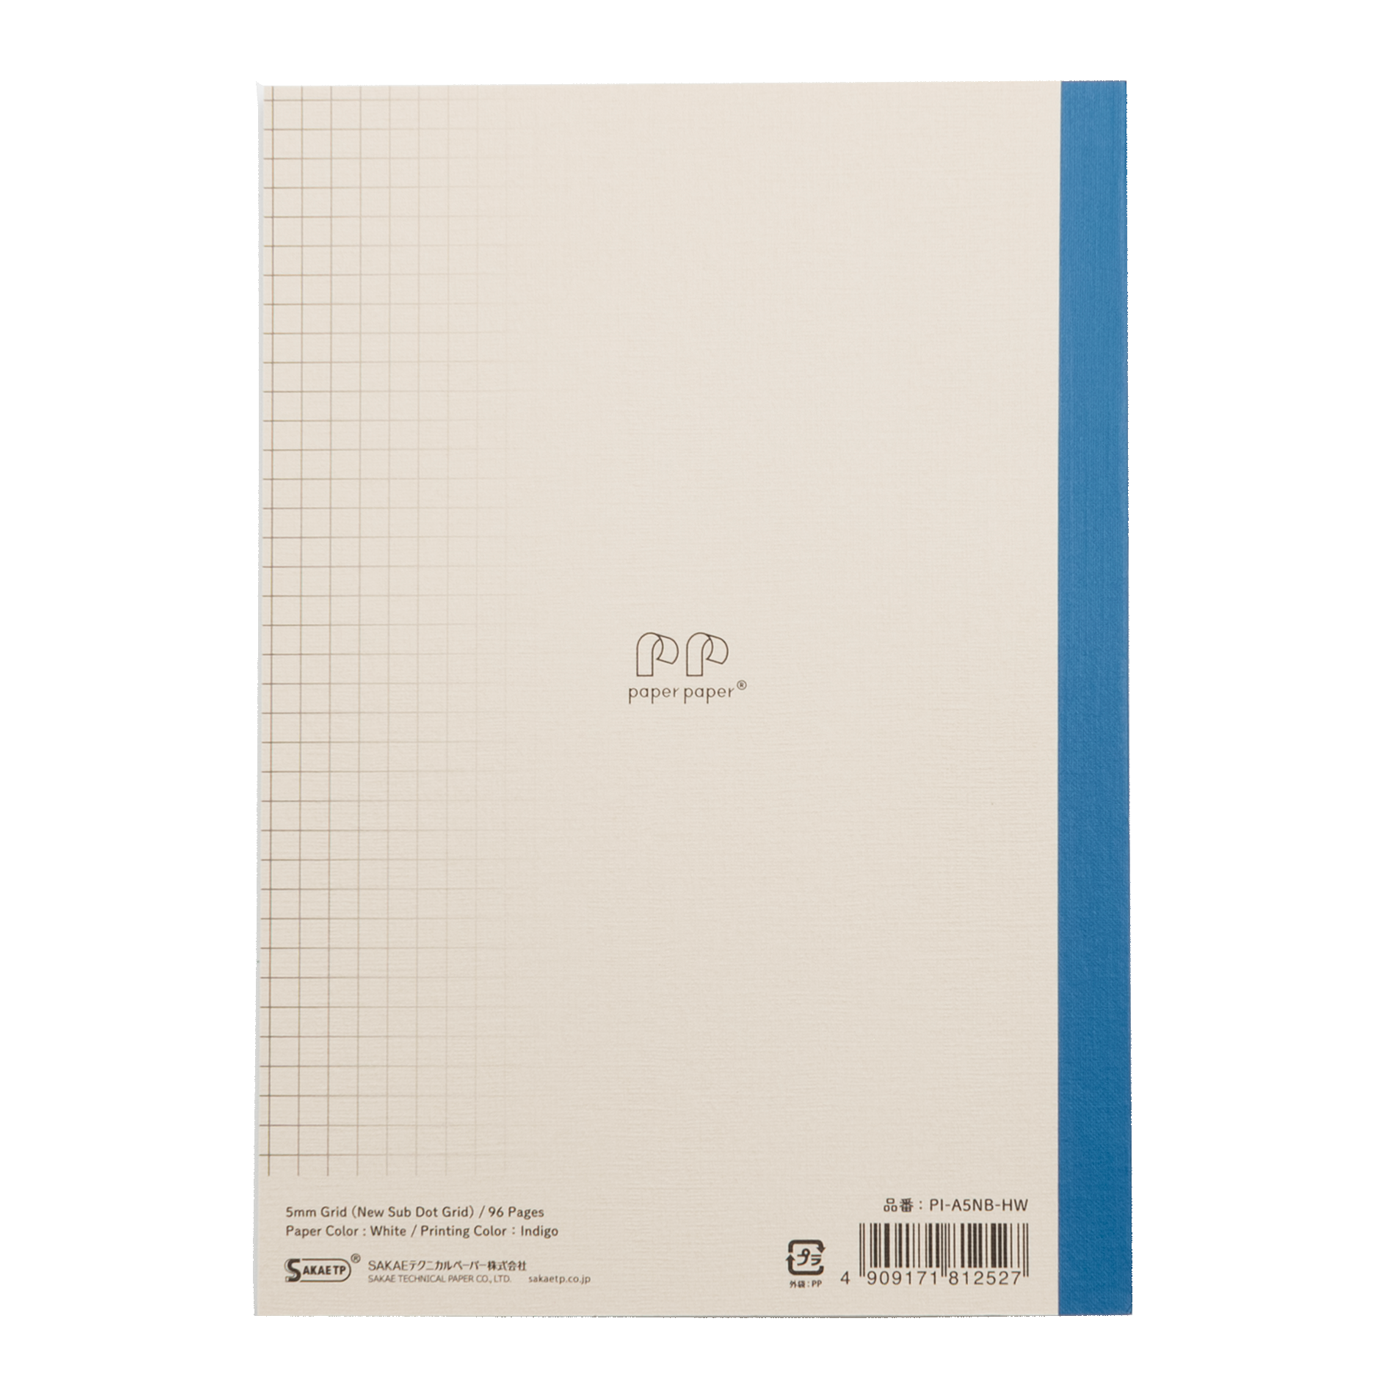 Iroful - A5 Soft Cover Notebook 5mm Grid